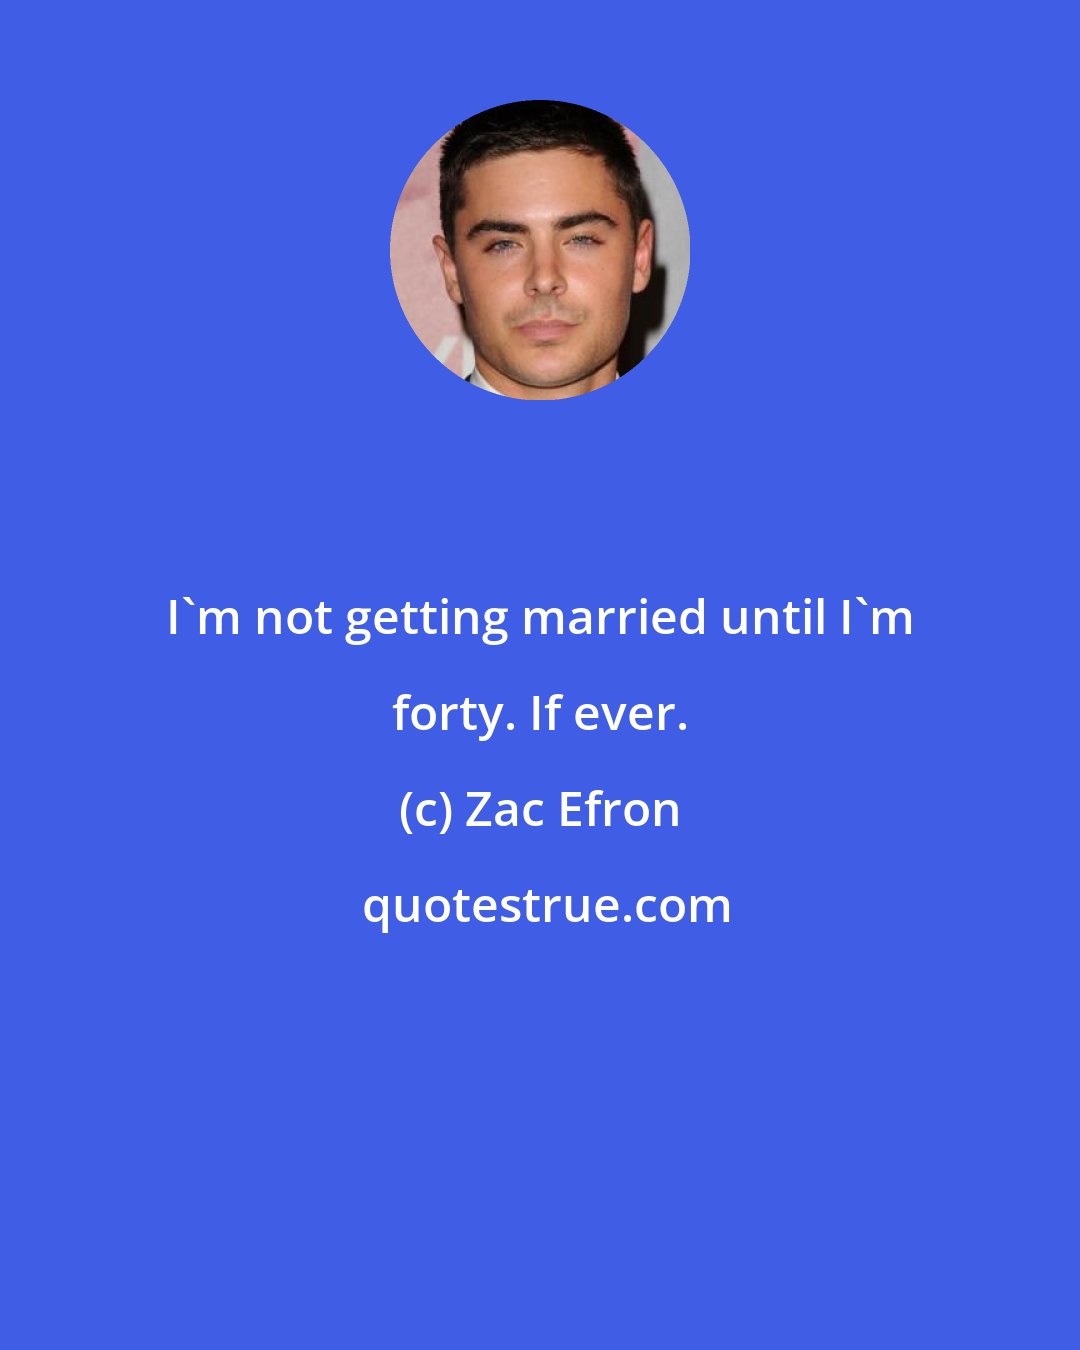 Zac Efron: I'm not getting married until I'm forty. If ever.